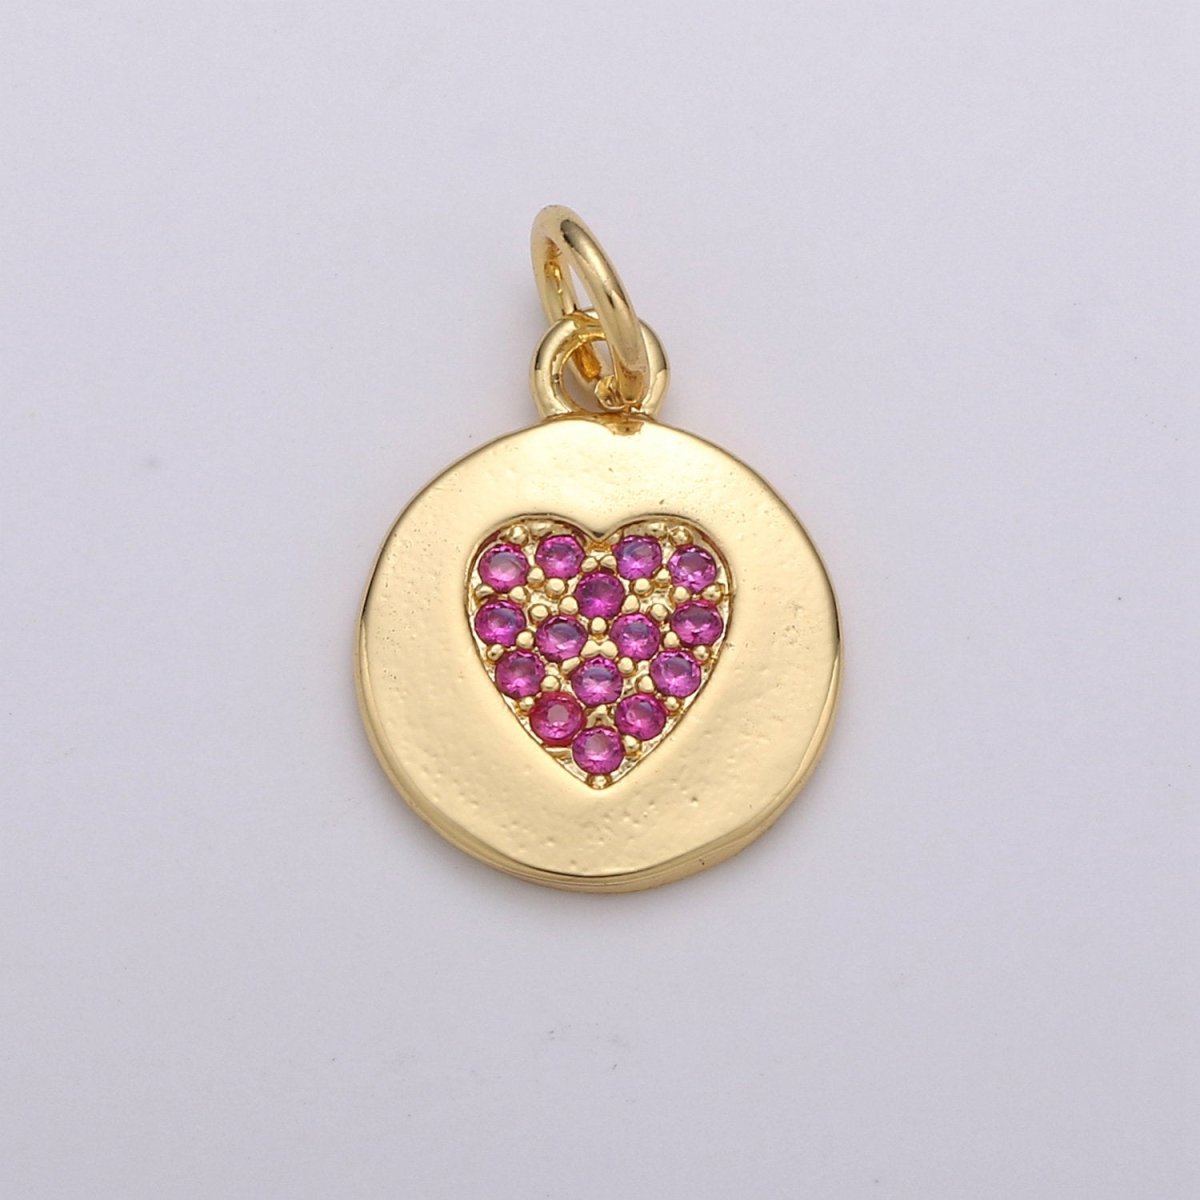 Dainty Gold Heart Charm, Disc Coin Charm gold Pendant, Minimalist Jewelry Making in 24k Gold Filled Findings for Bracelet Earring D-347 - DLUXCA